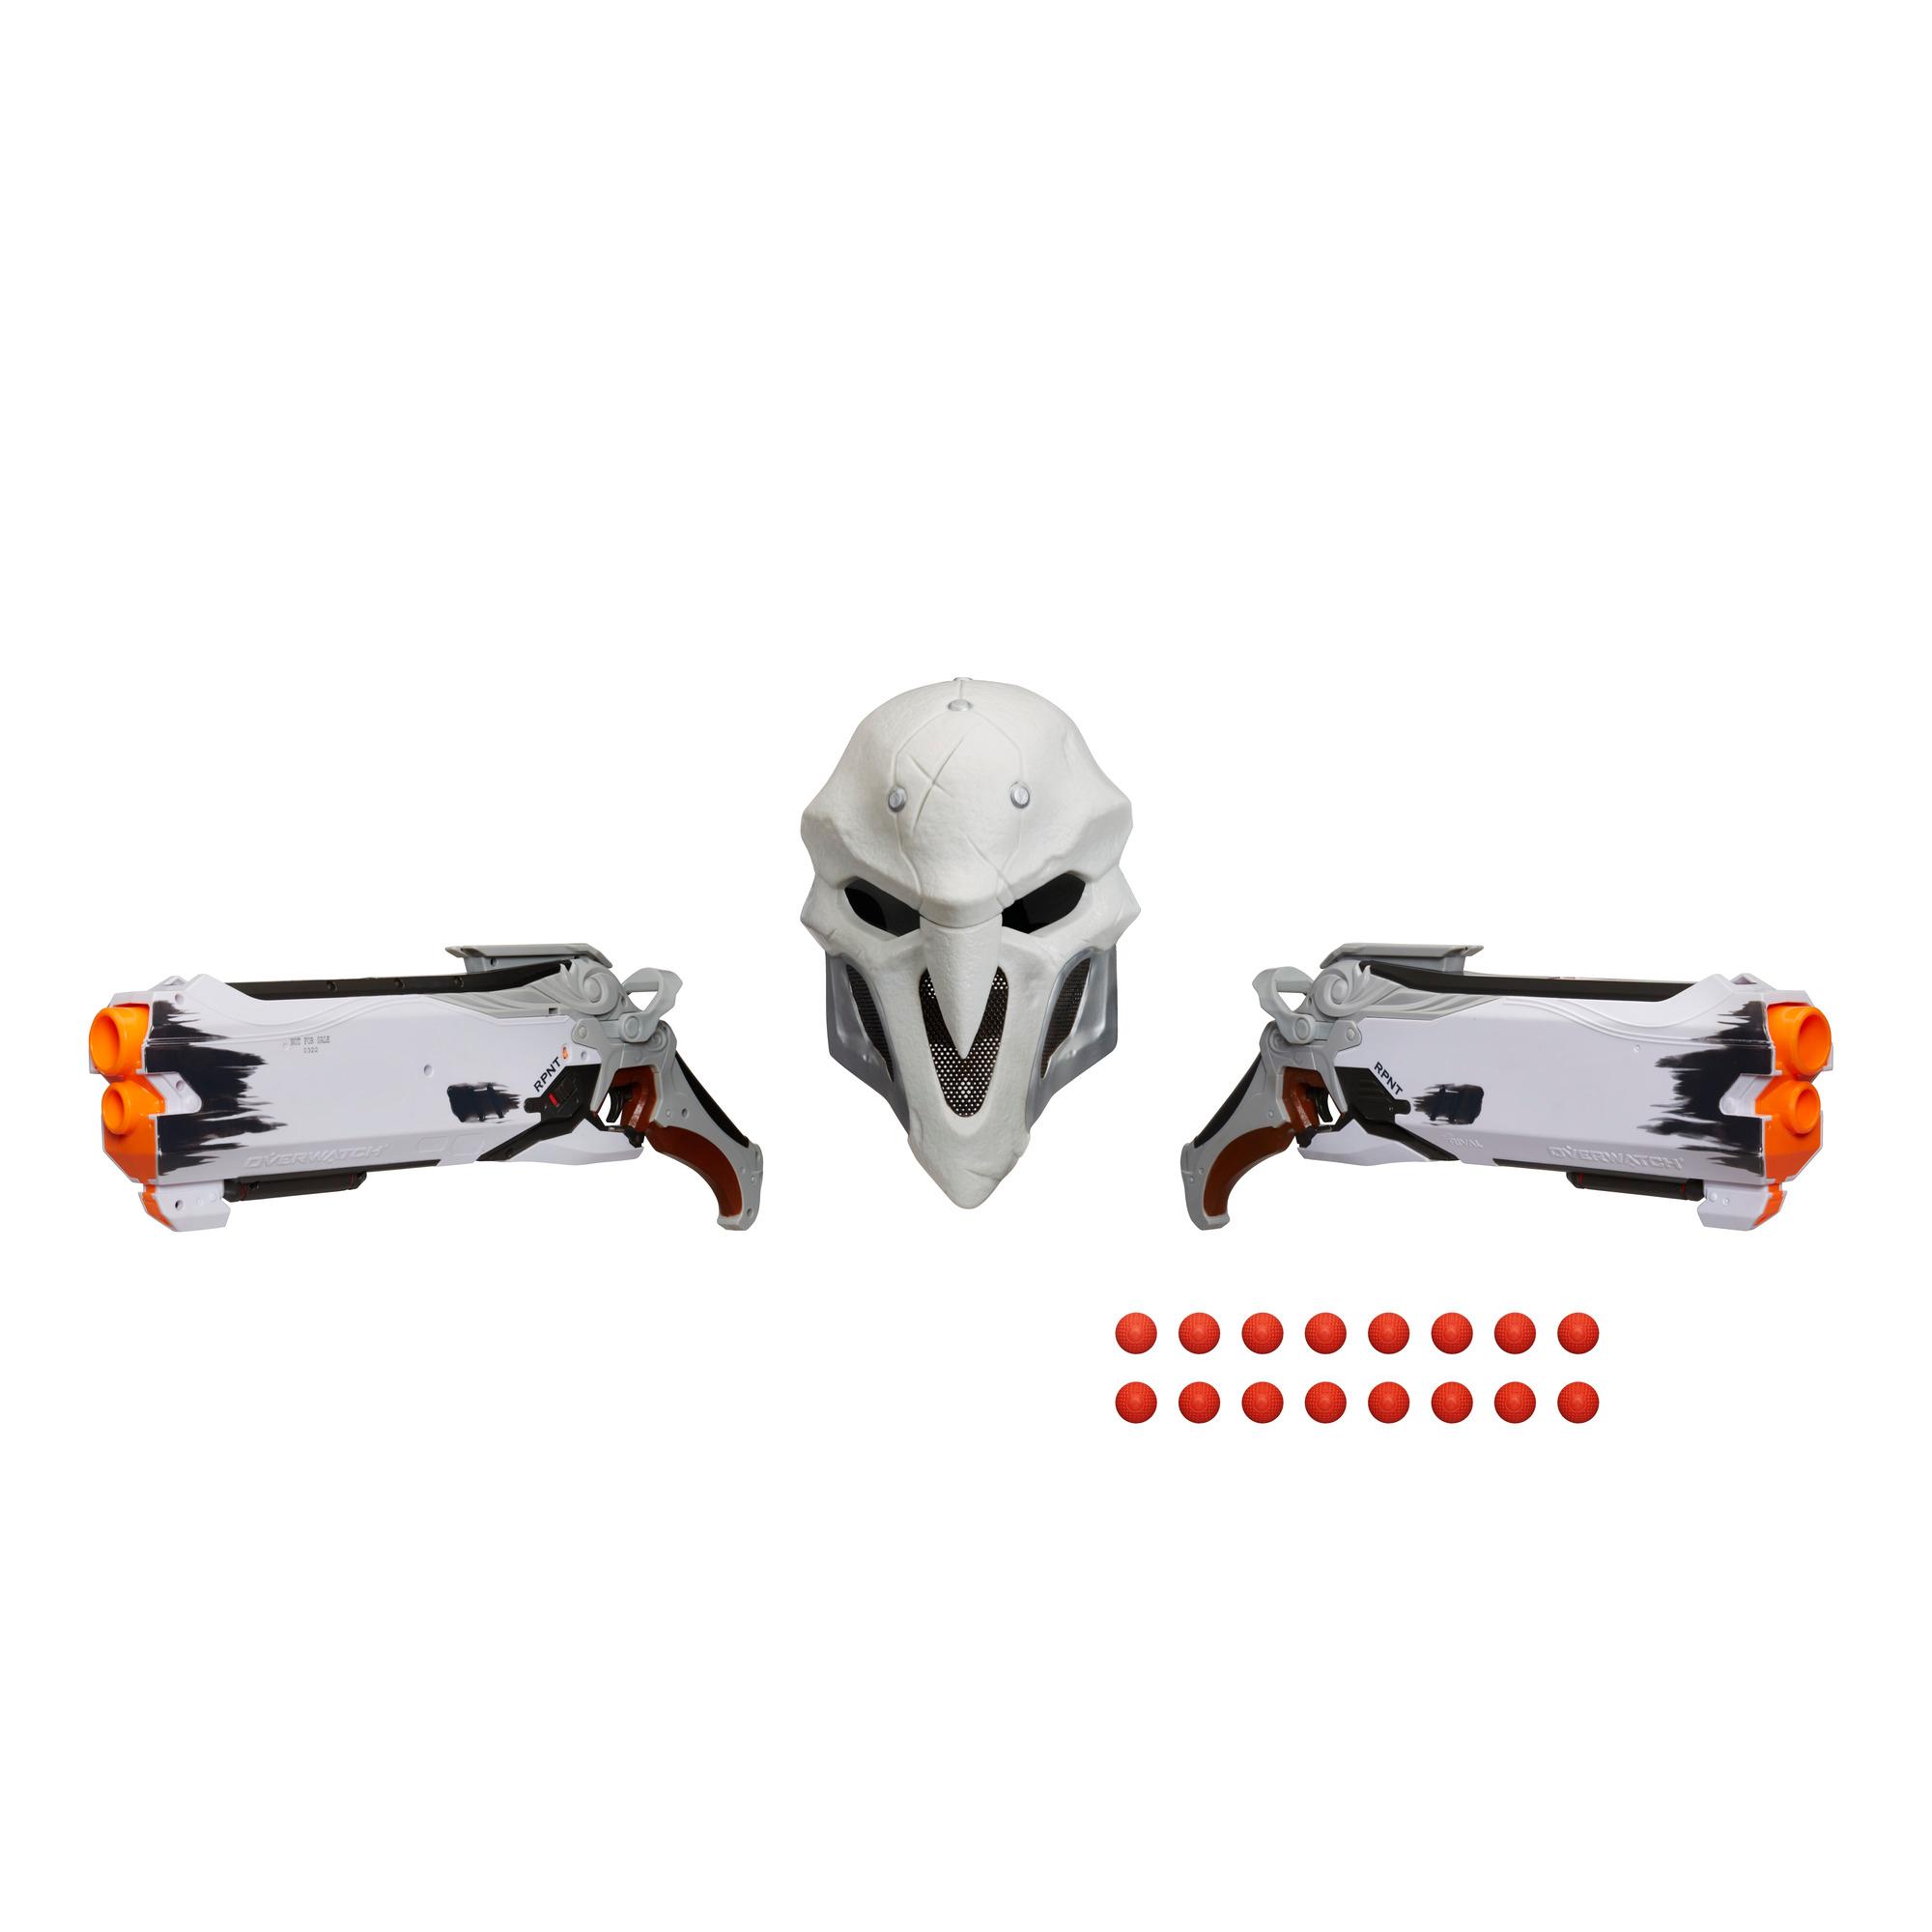 Overwatch Reaper (Wight Edition) Collector Pack with 2 Nerf Rival Blasters 1 Reaper Face Mask and 16 Overwatch Nerf Rival Rounds